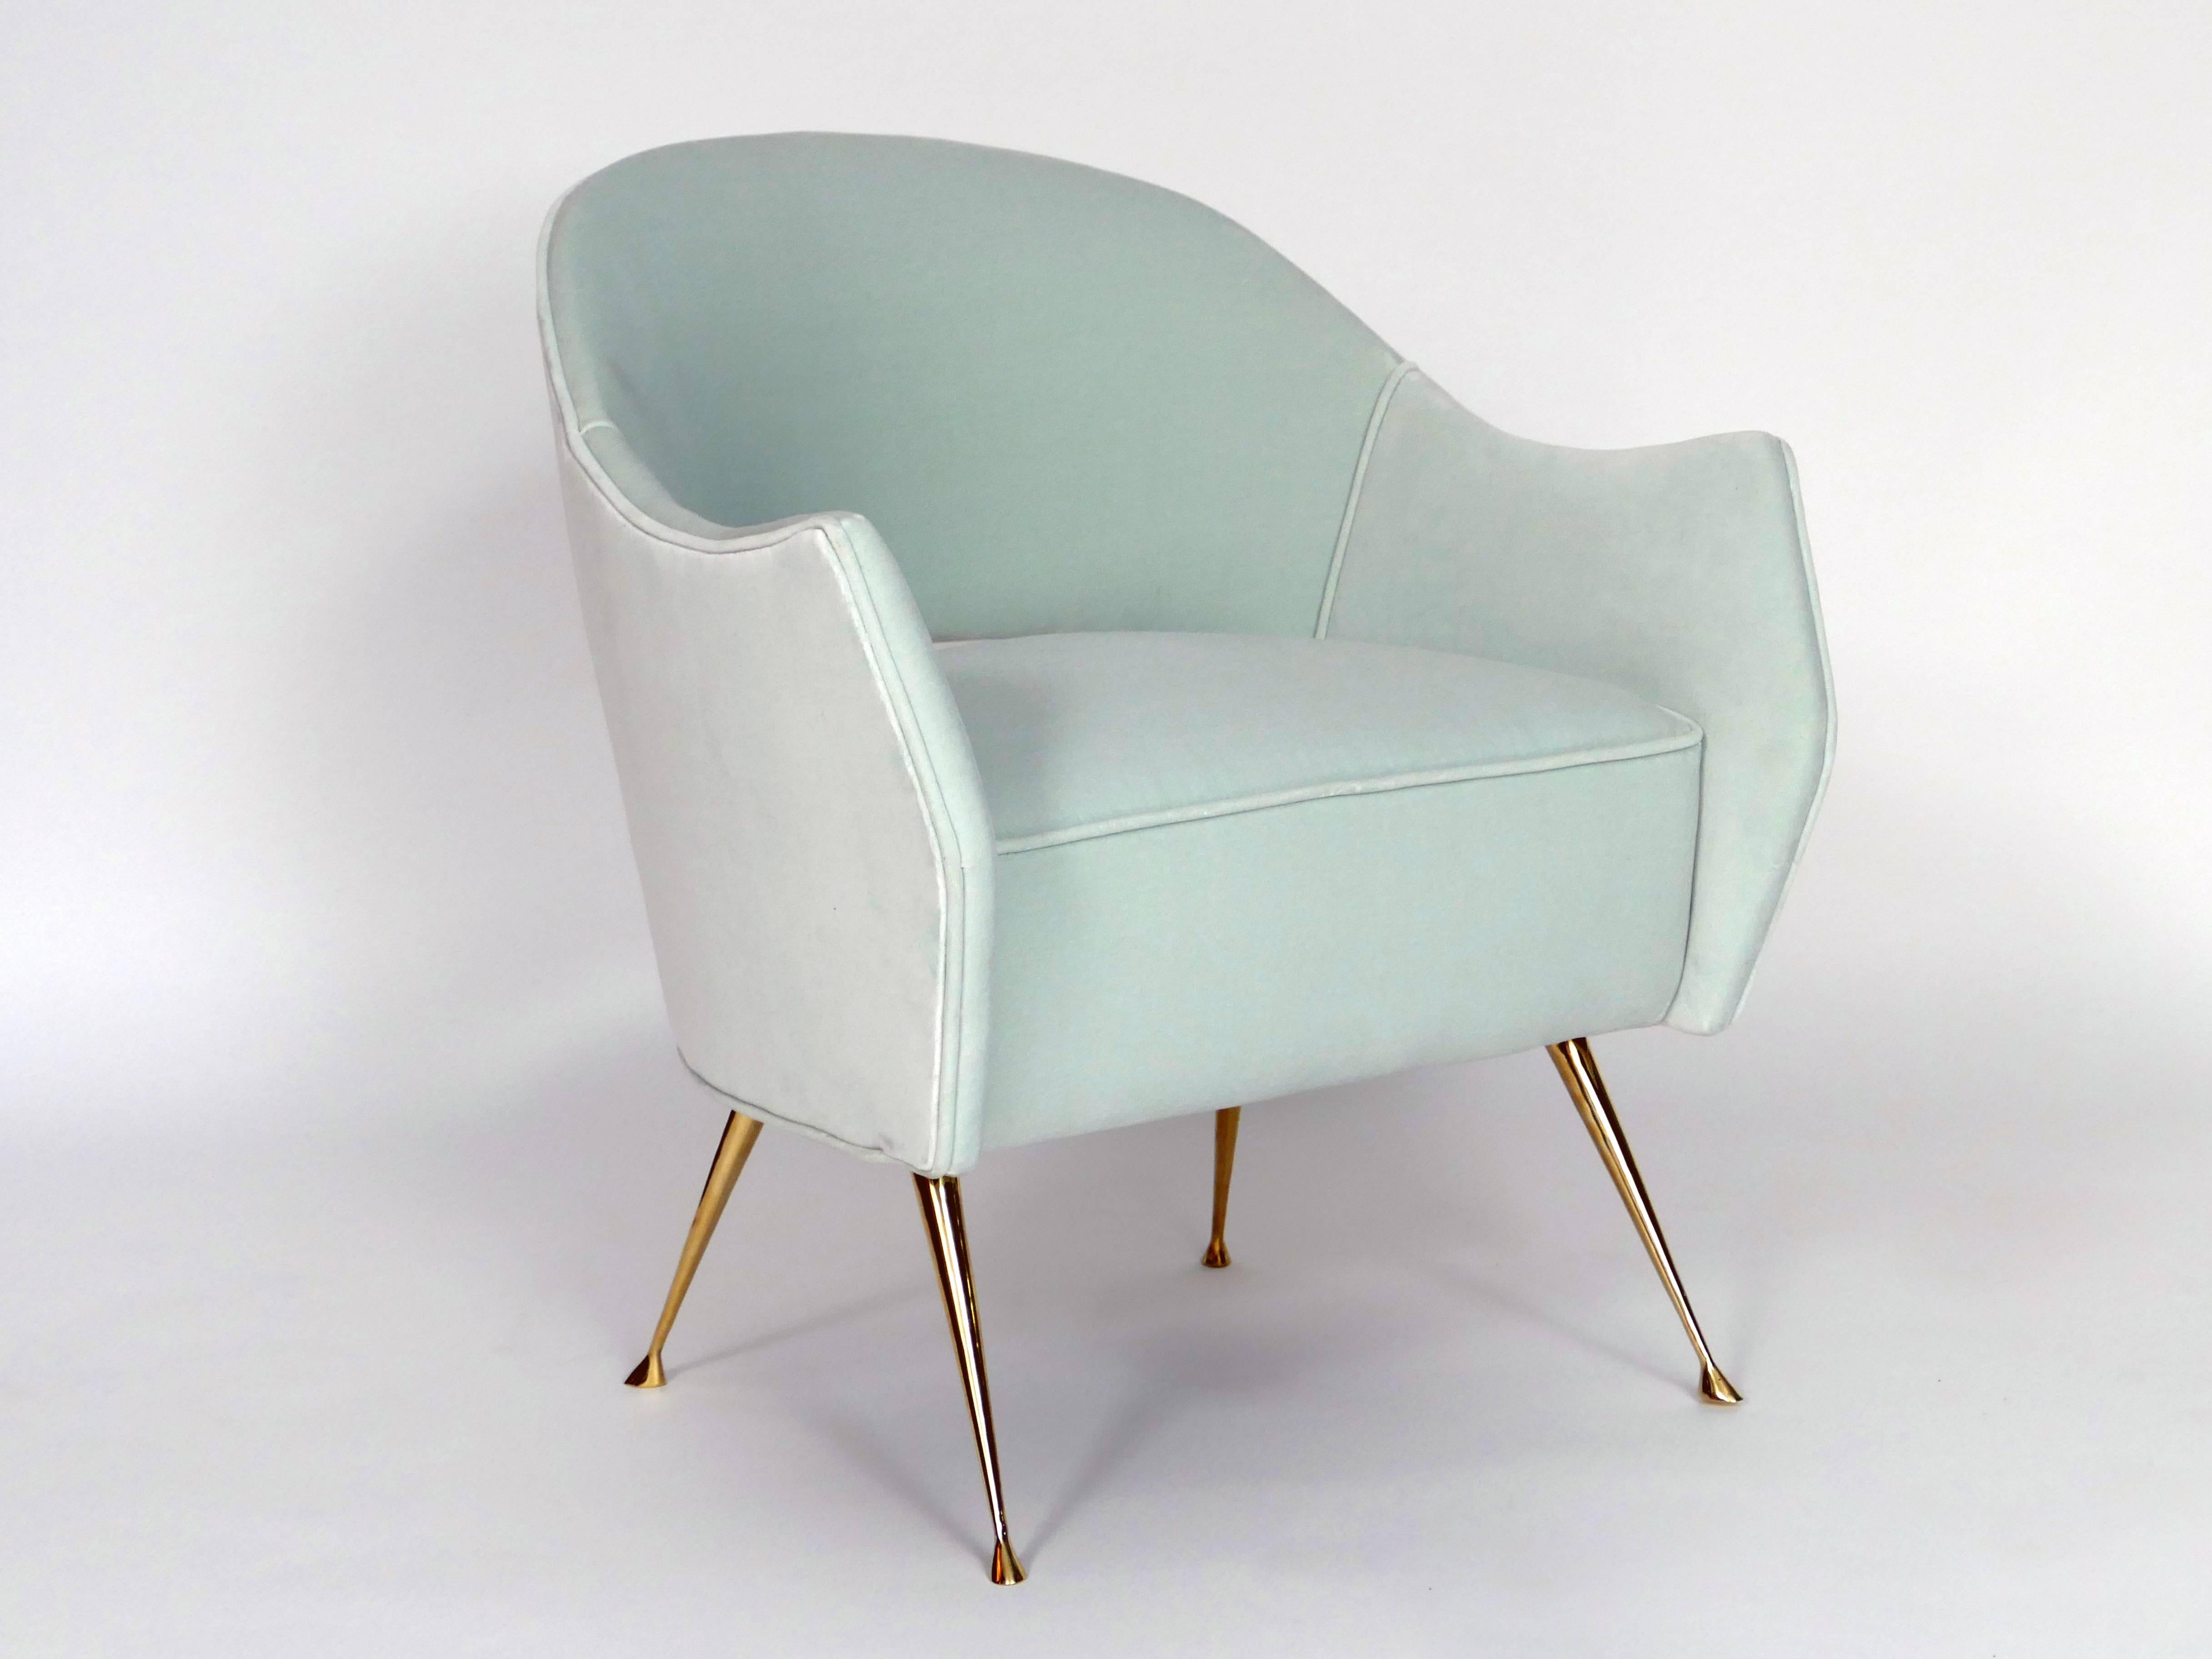 These elegant chairs have cast brass legs and a distinctive curved back. The chairs are very comfortable, perfect in size and are ideal as small-scale side chairs. The beauty of the tapered brass legs with their graceful feet are sure to add that